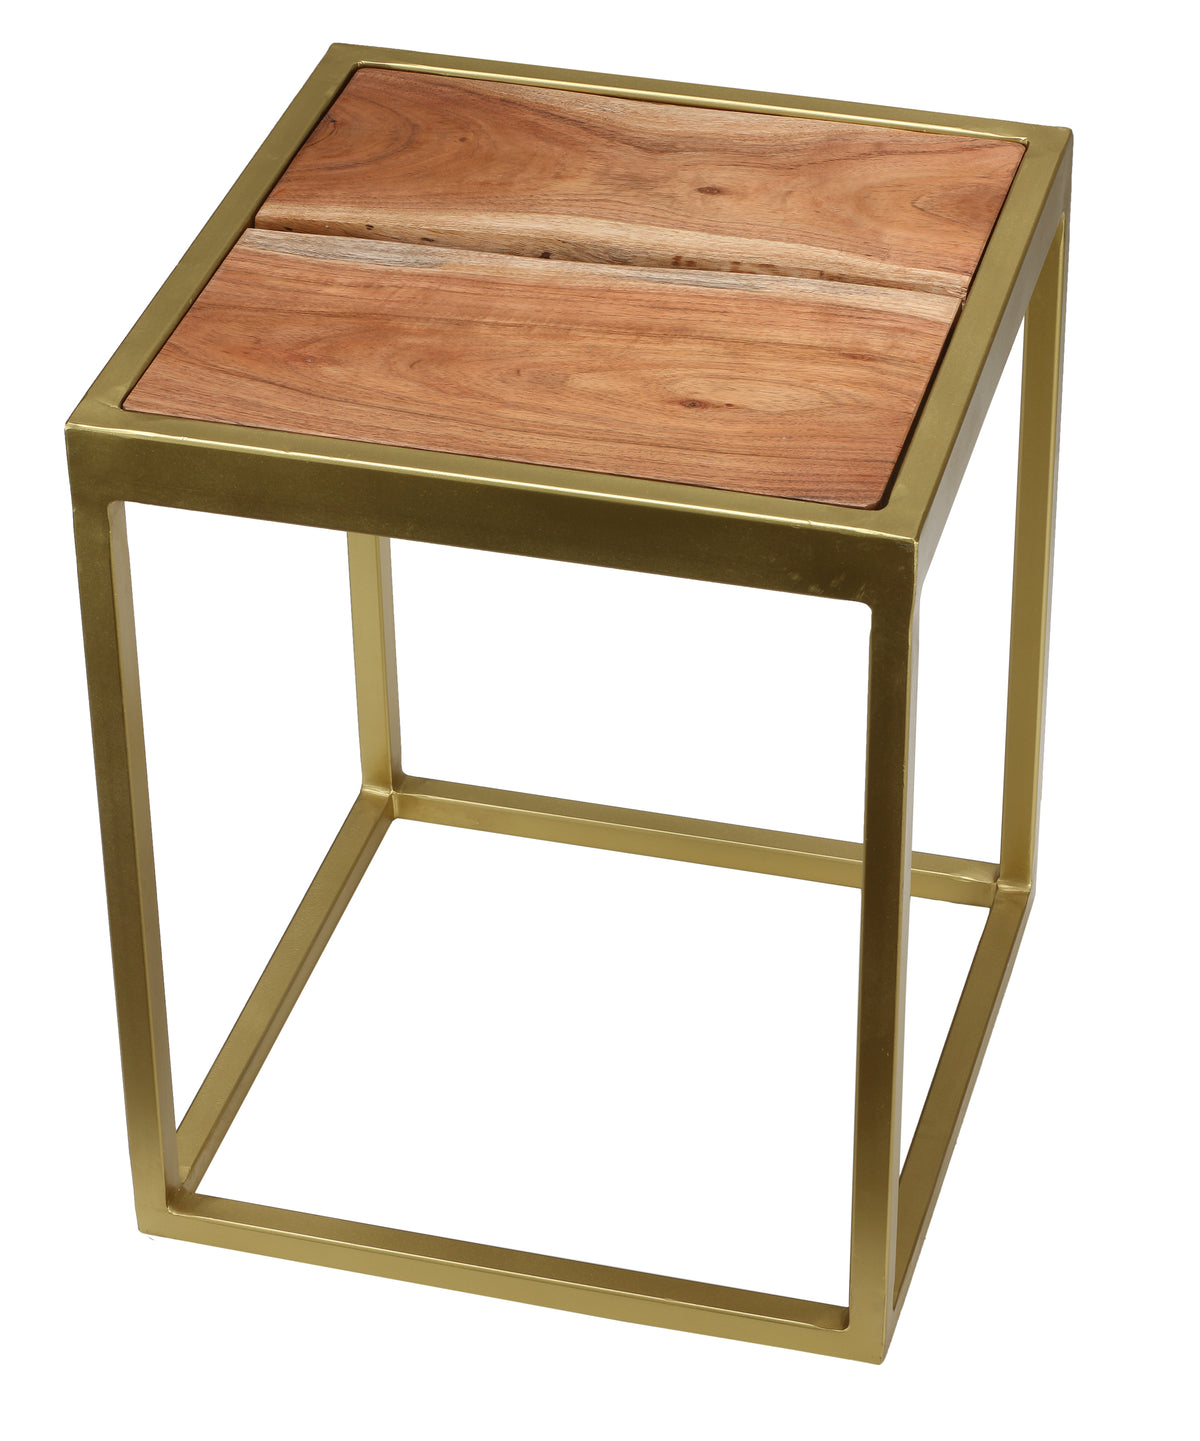 Bare Decor Dixie Brushed Gold and Wood End Table